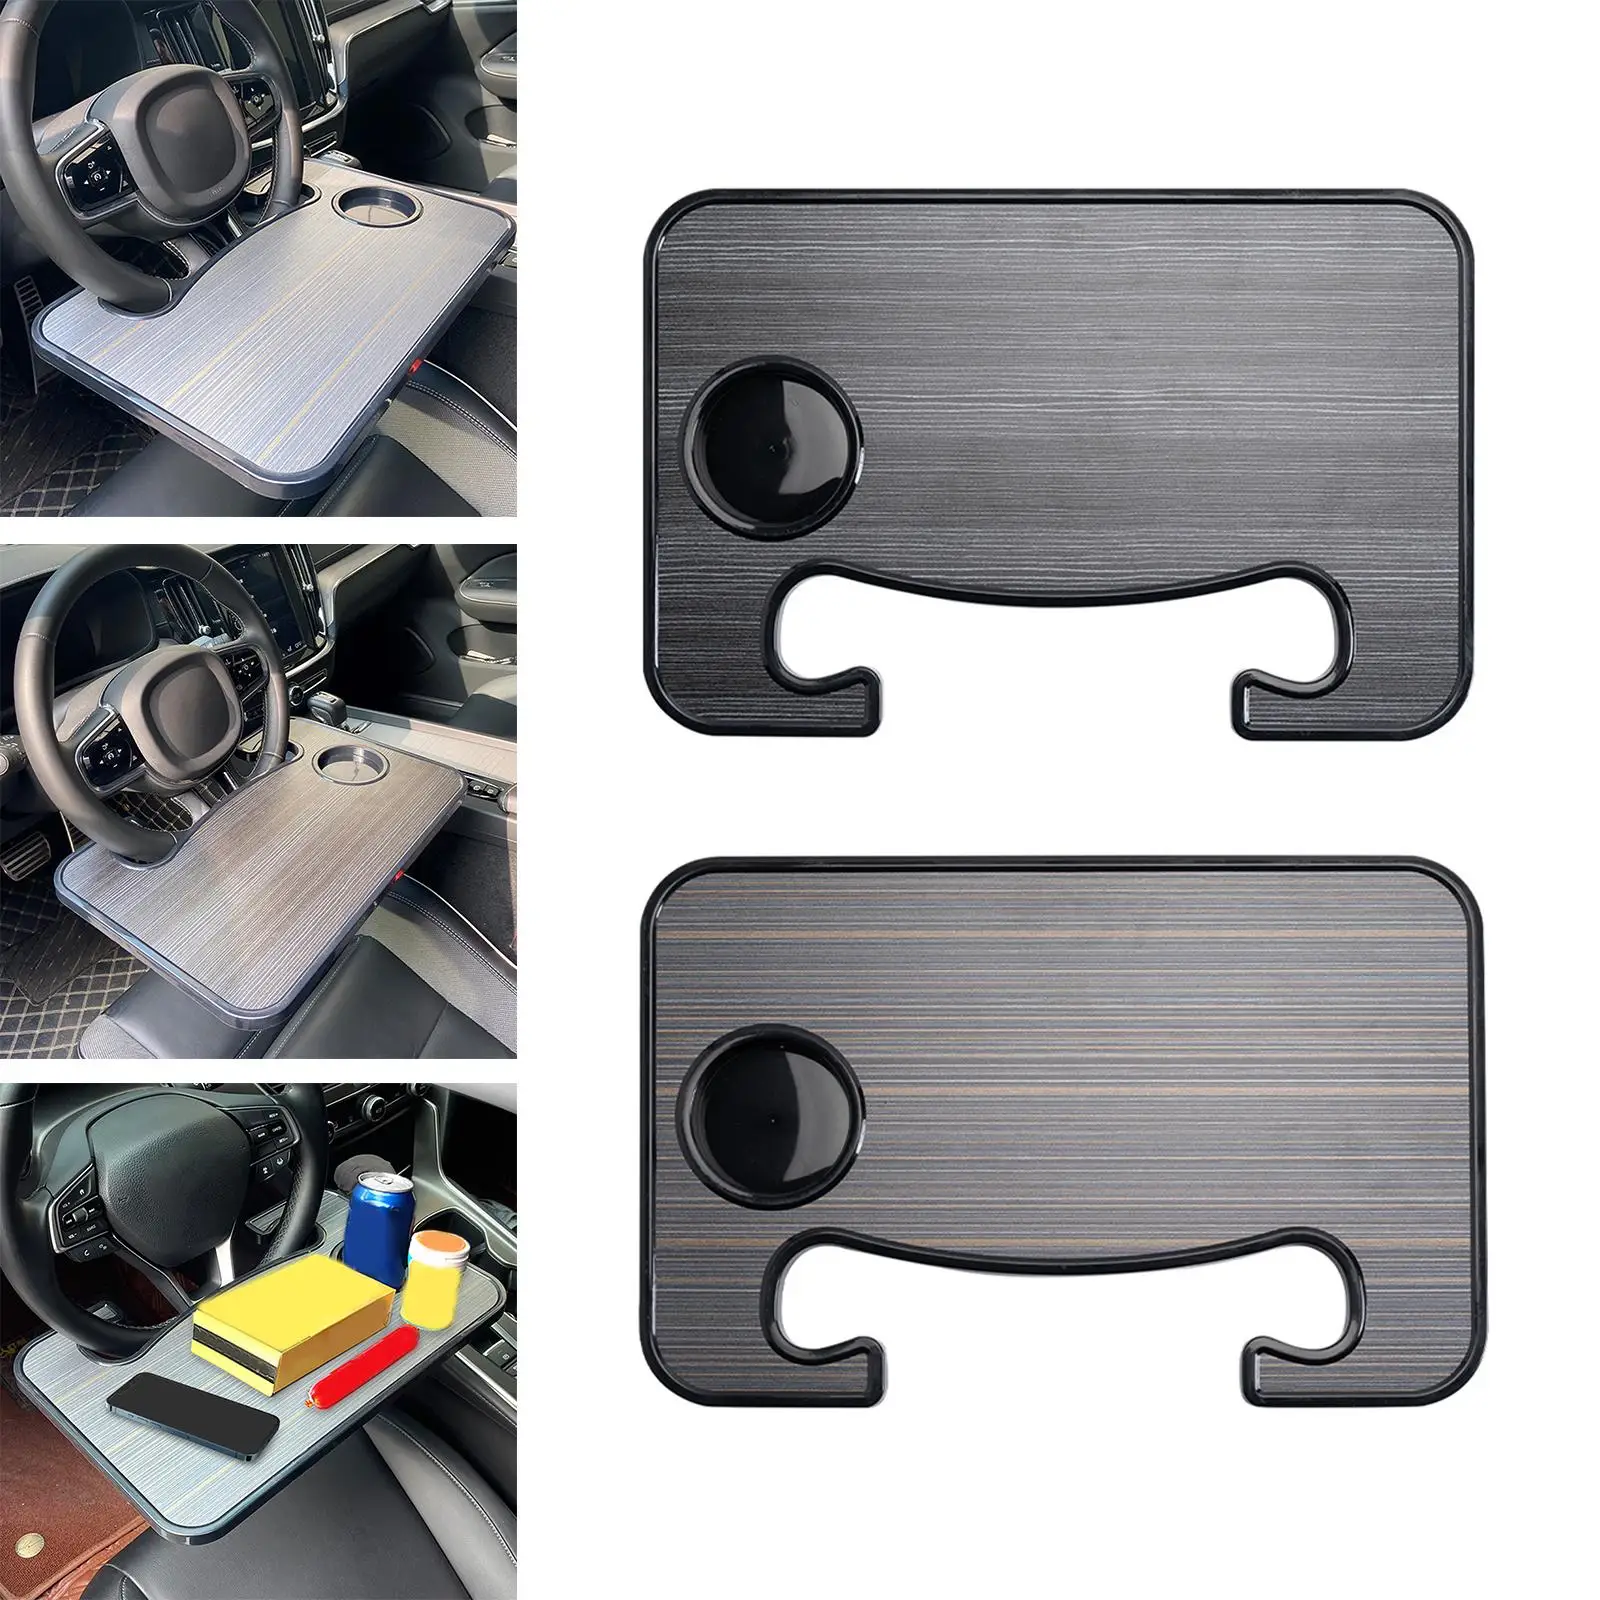 Car Trays Mount for Eating Lunch for Most Vehicles Steering Wheels